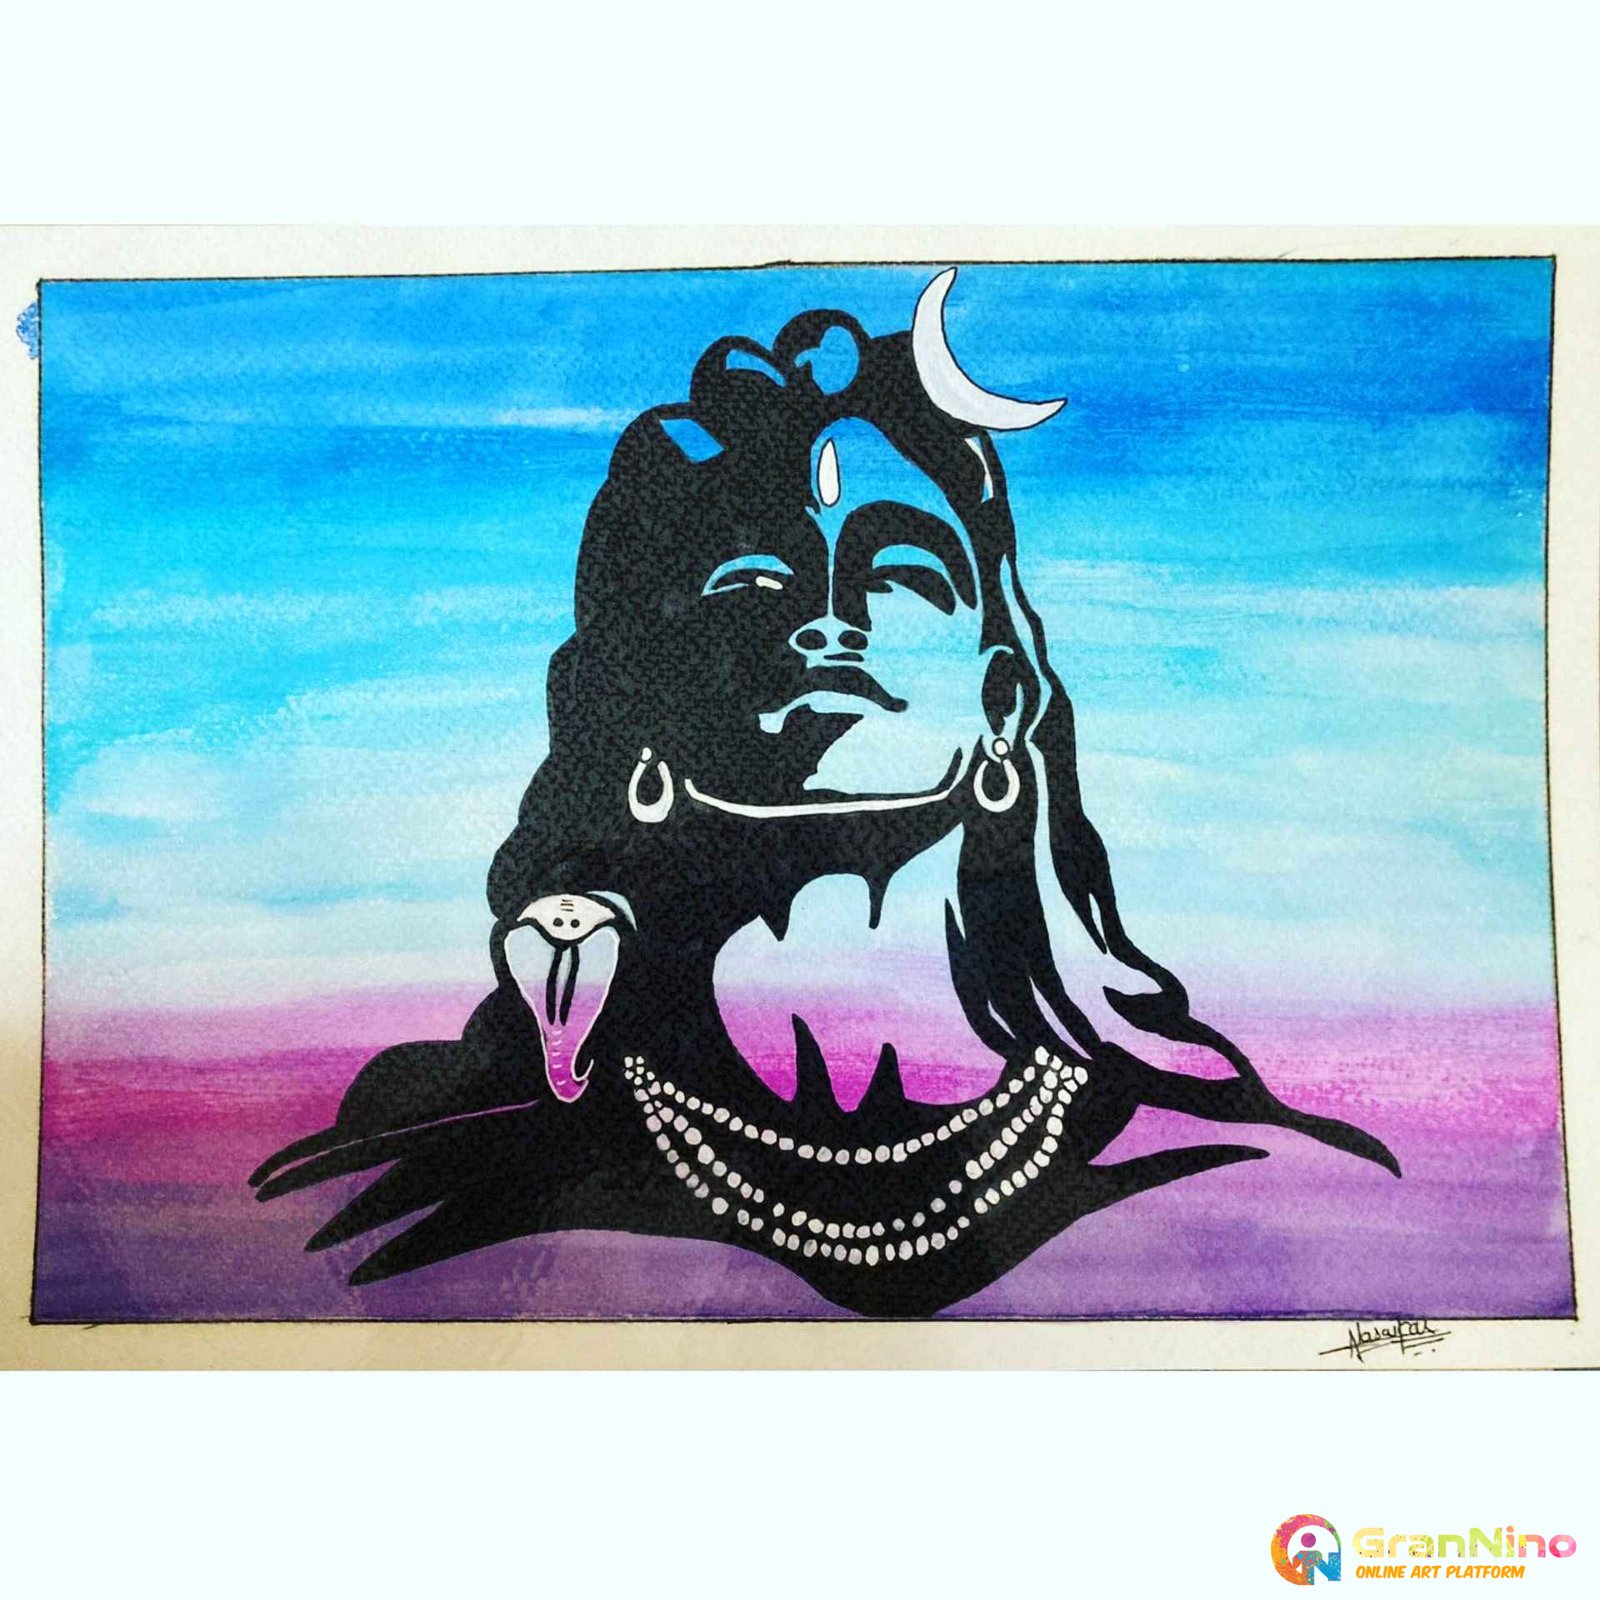 2,399 Shiva Drawing Images, Stock Photos, 3D objects, & Vectors |  Shutterstock